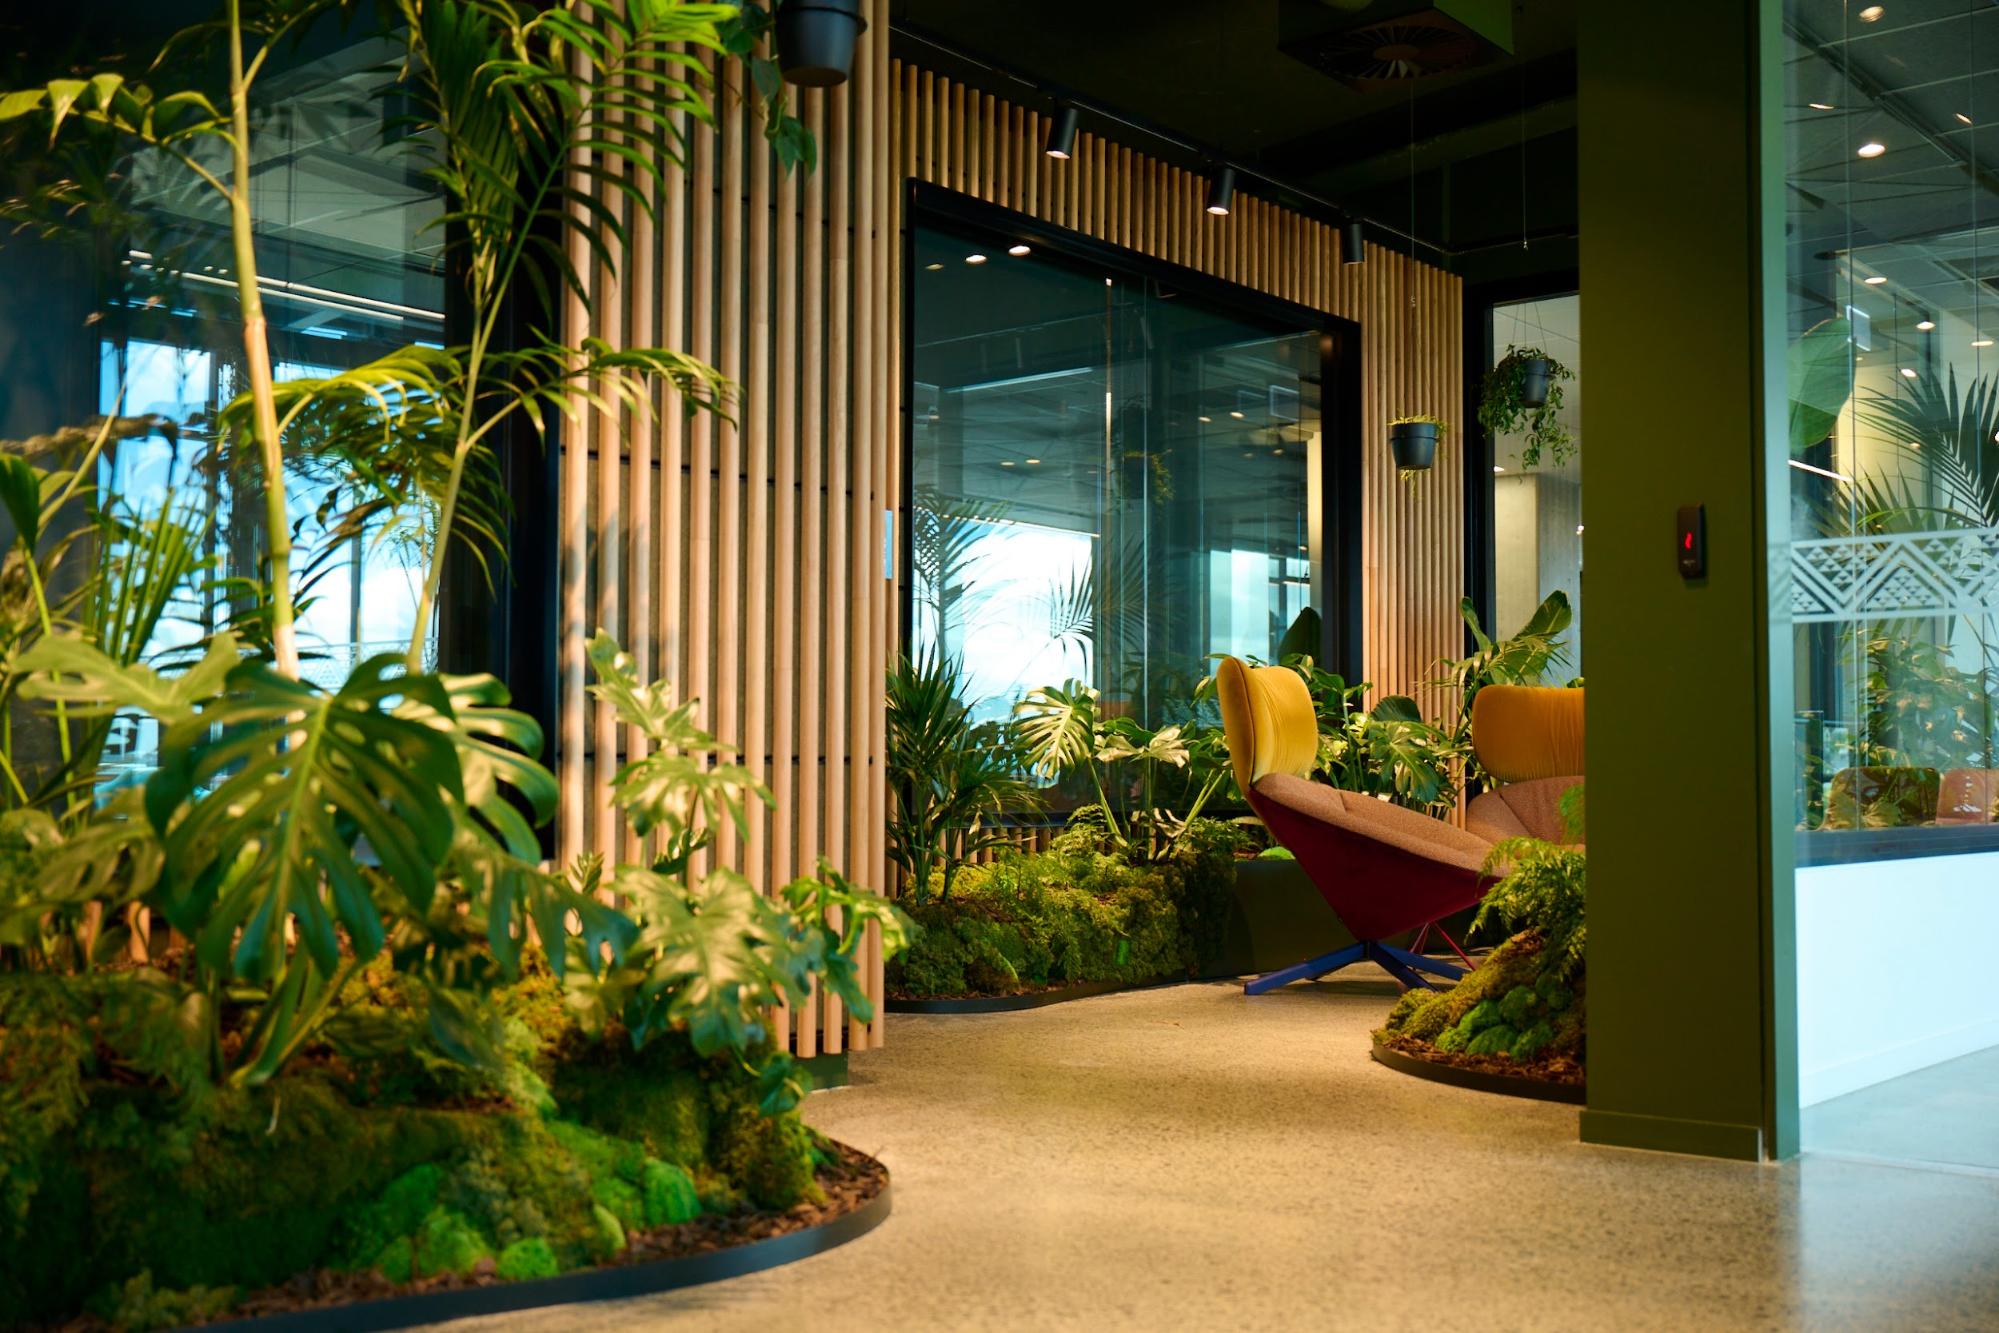 Can Architecture Affect Your Health? Biophilic Design Offers Insight